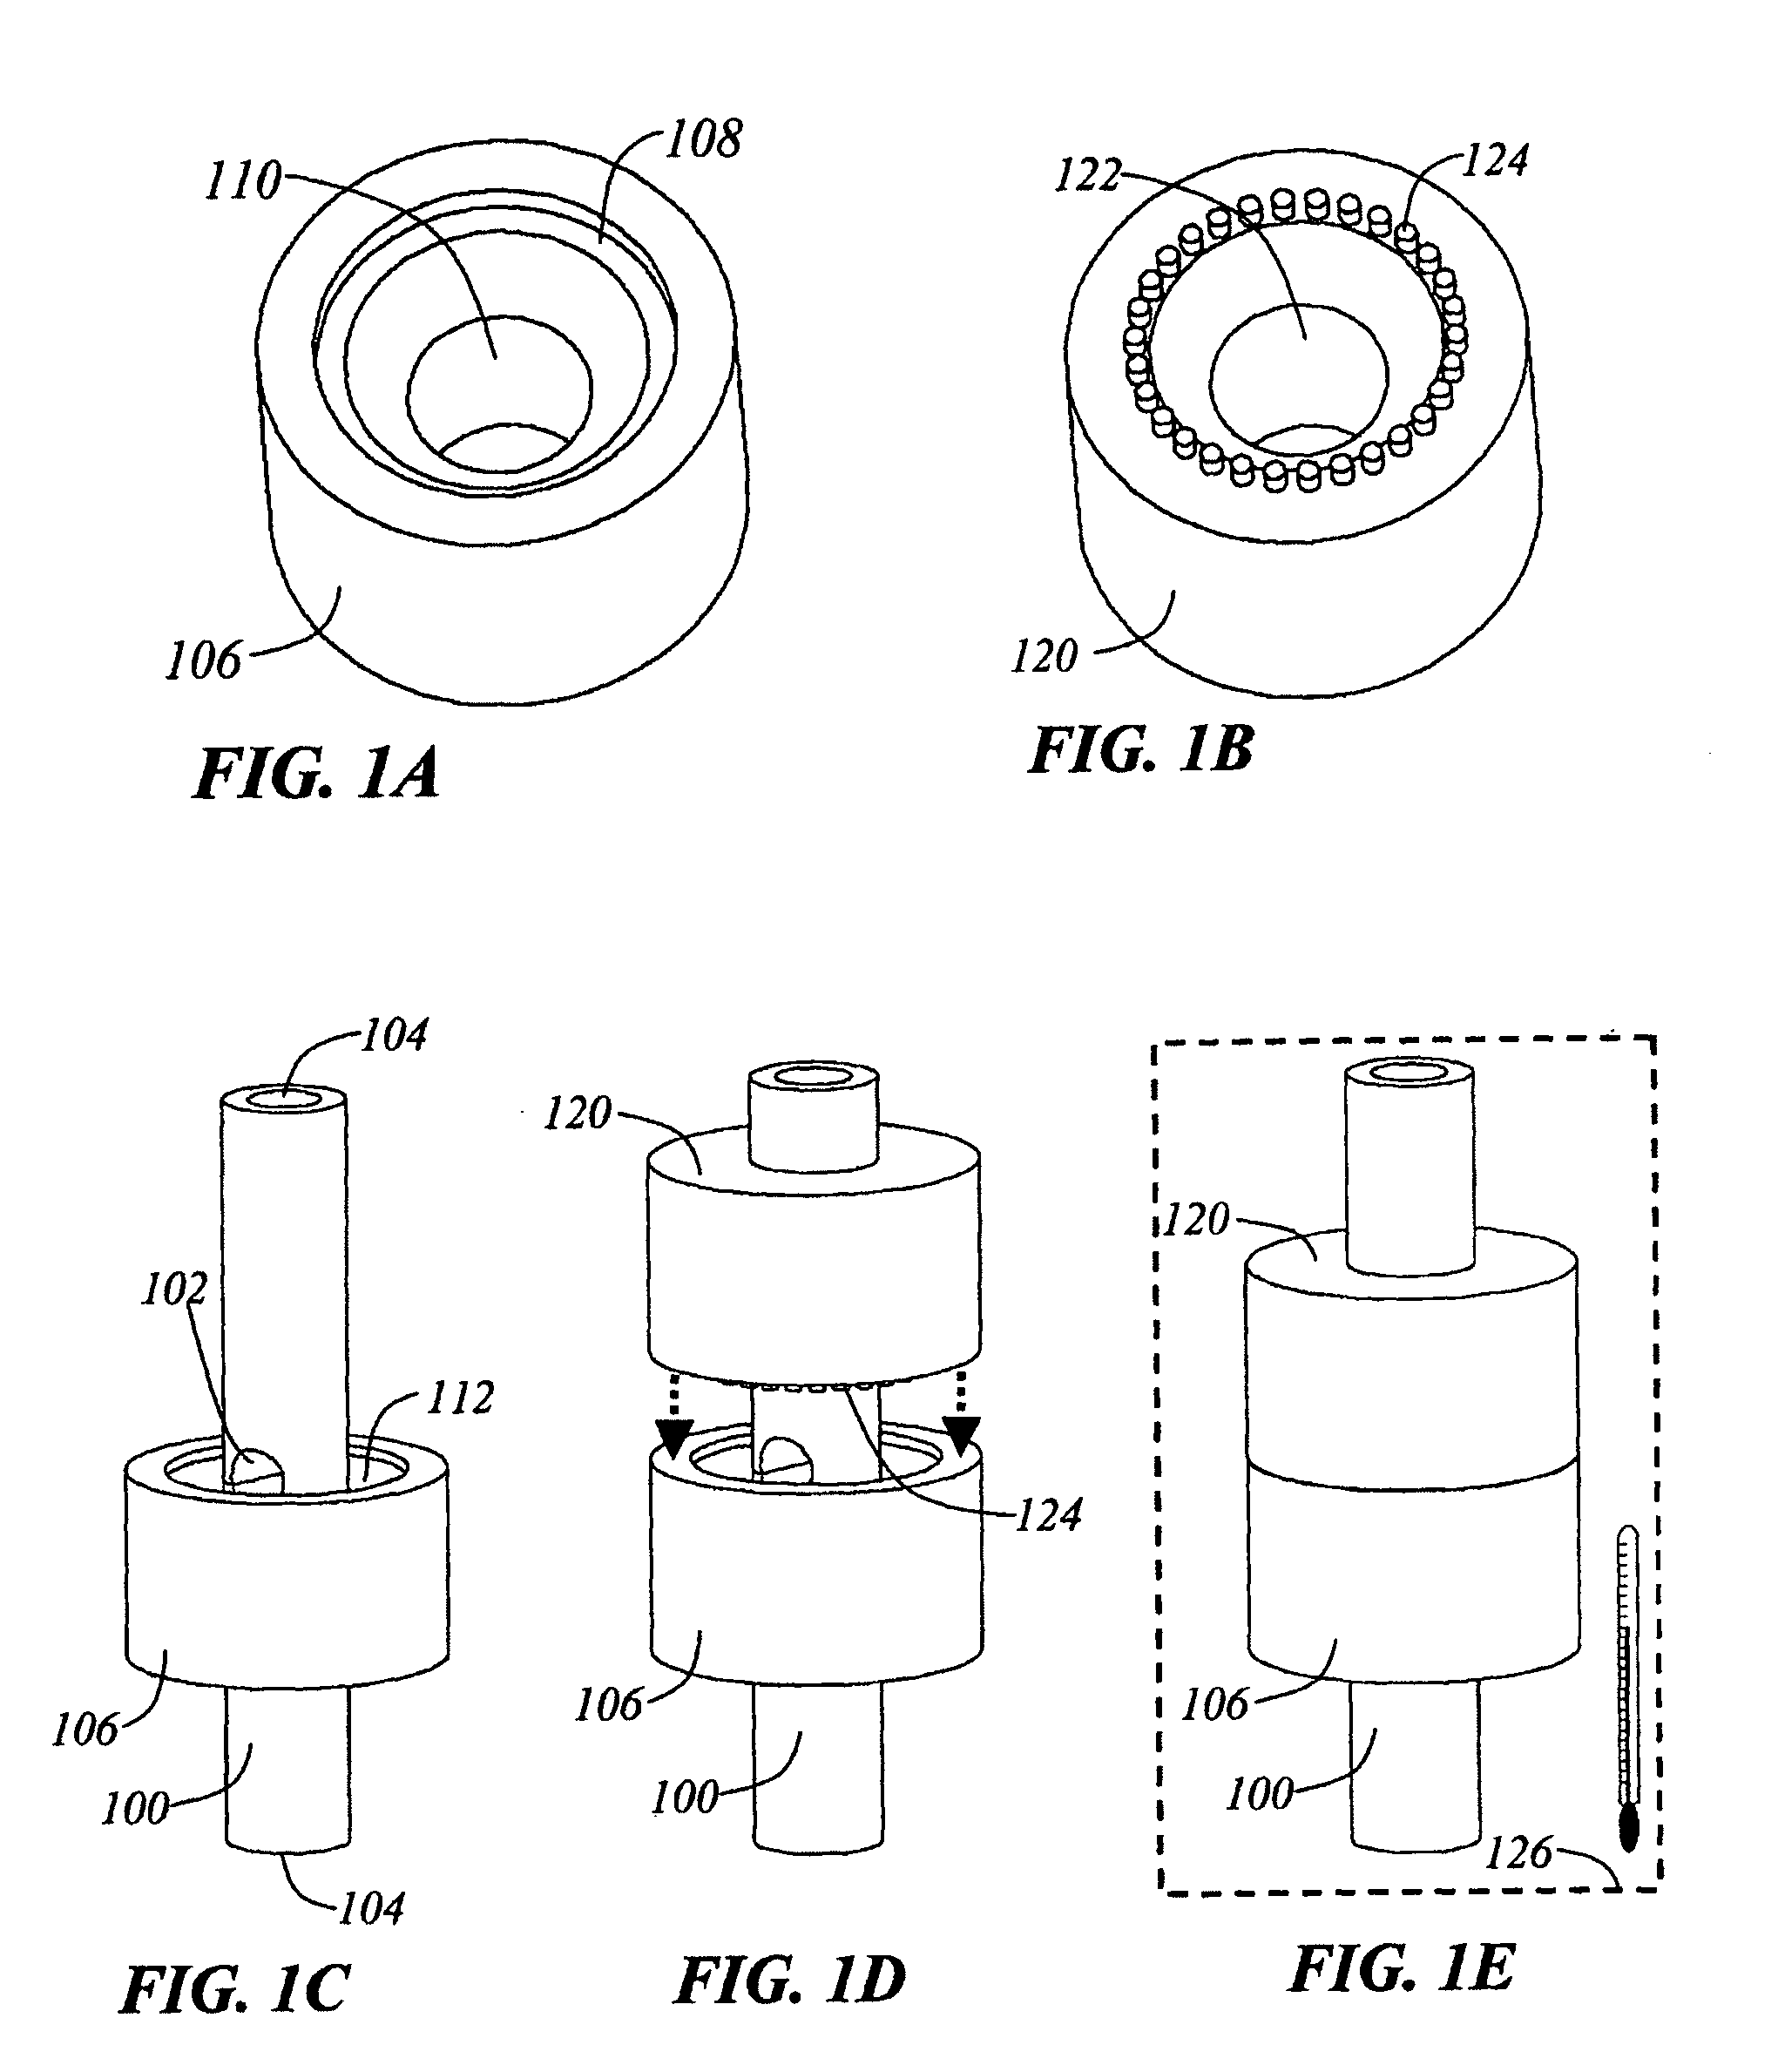 Methods,  apparatus and systems for production, collection, handling, and imaging of tissue sections